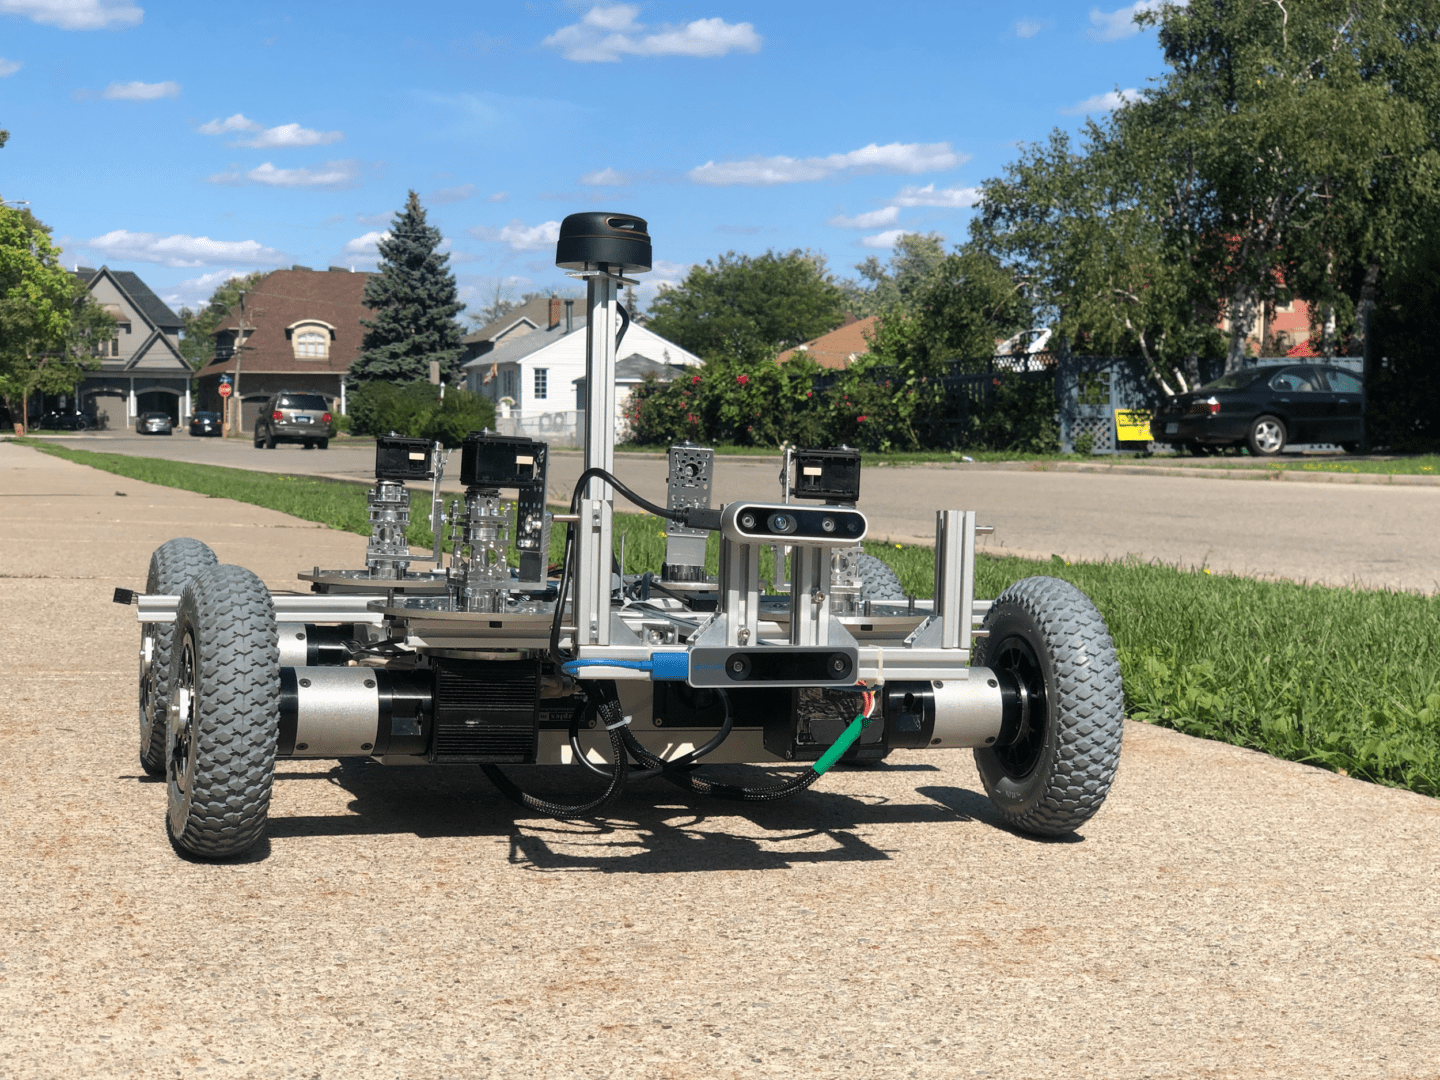 The Blip delivery robot is a wheeled, robotic-looking platform, half the width of a sidewalk.